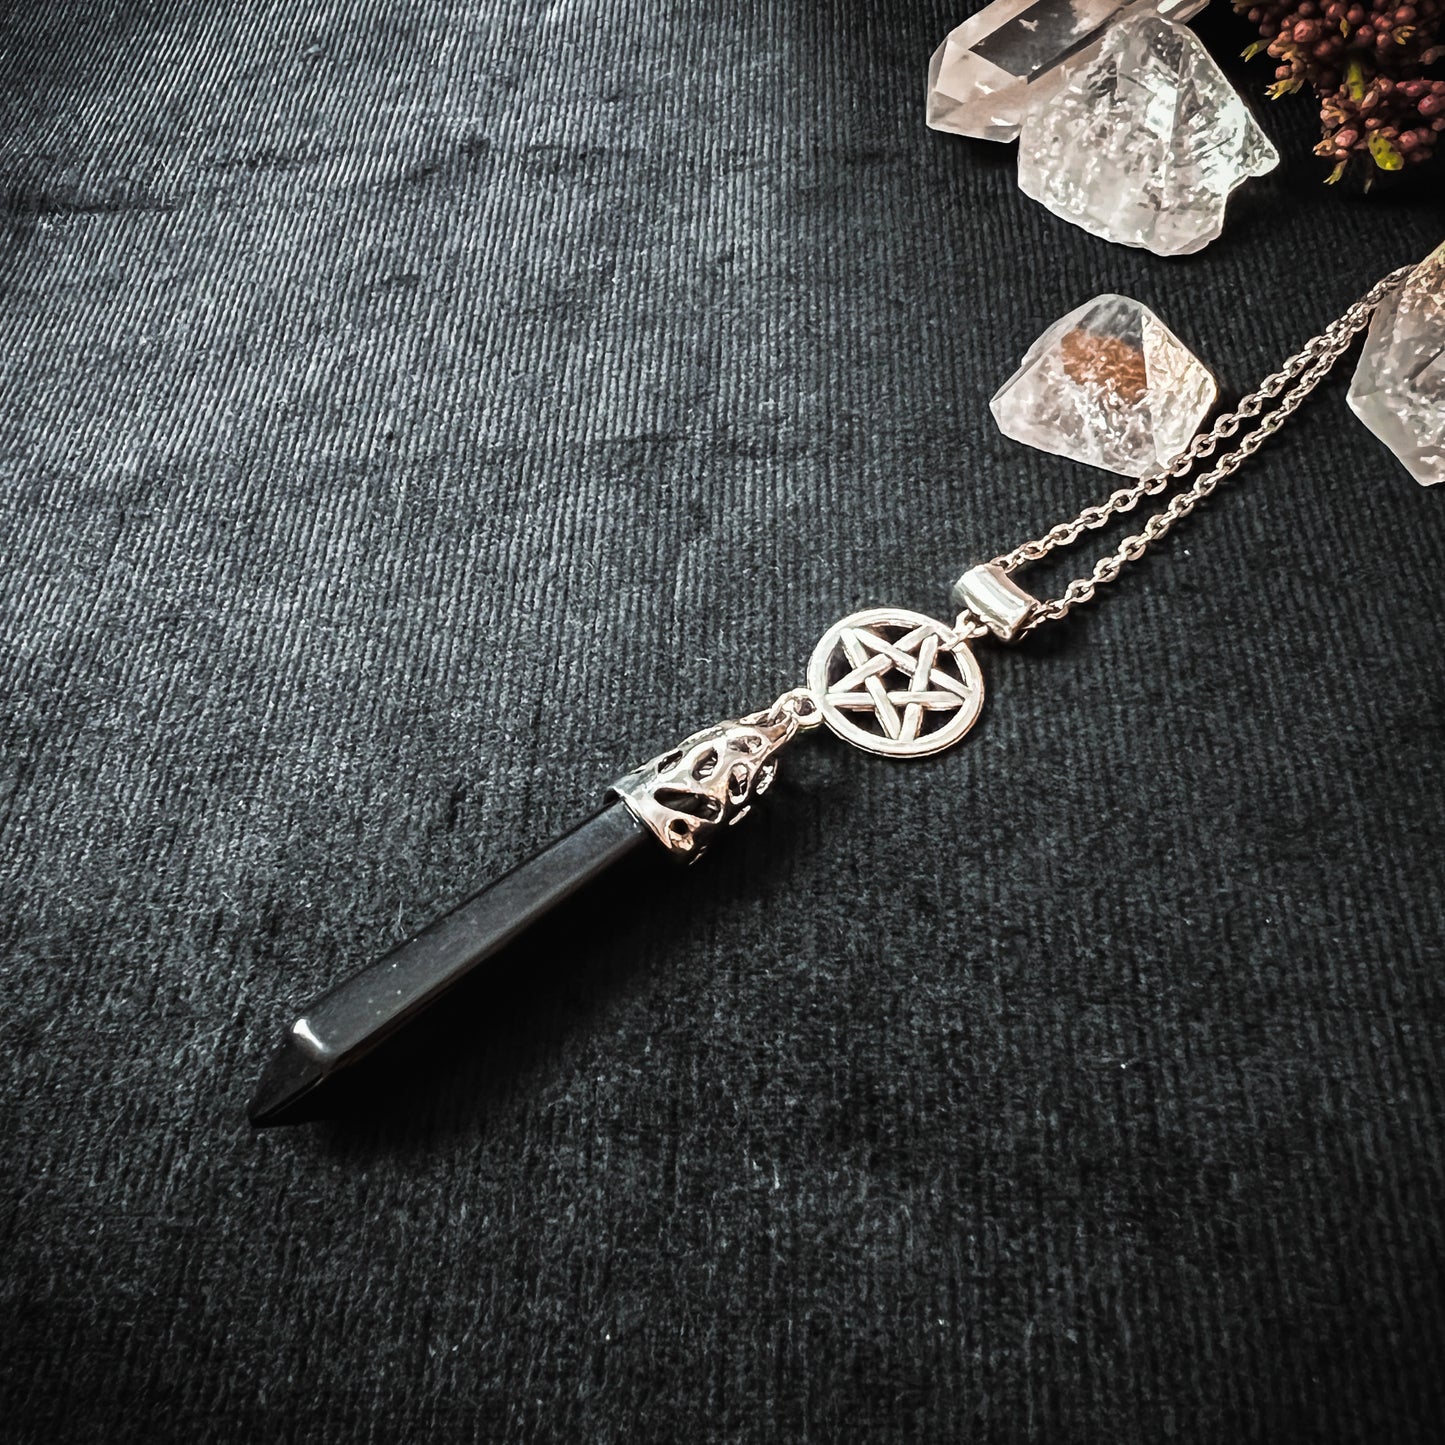 Onyx and reversed pentacle divination pendulum necklace The French Witch shop